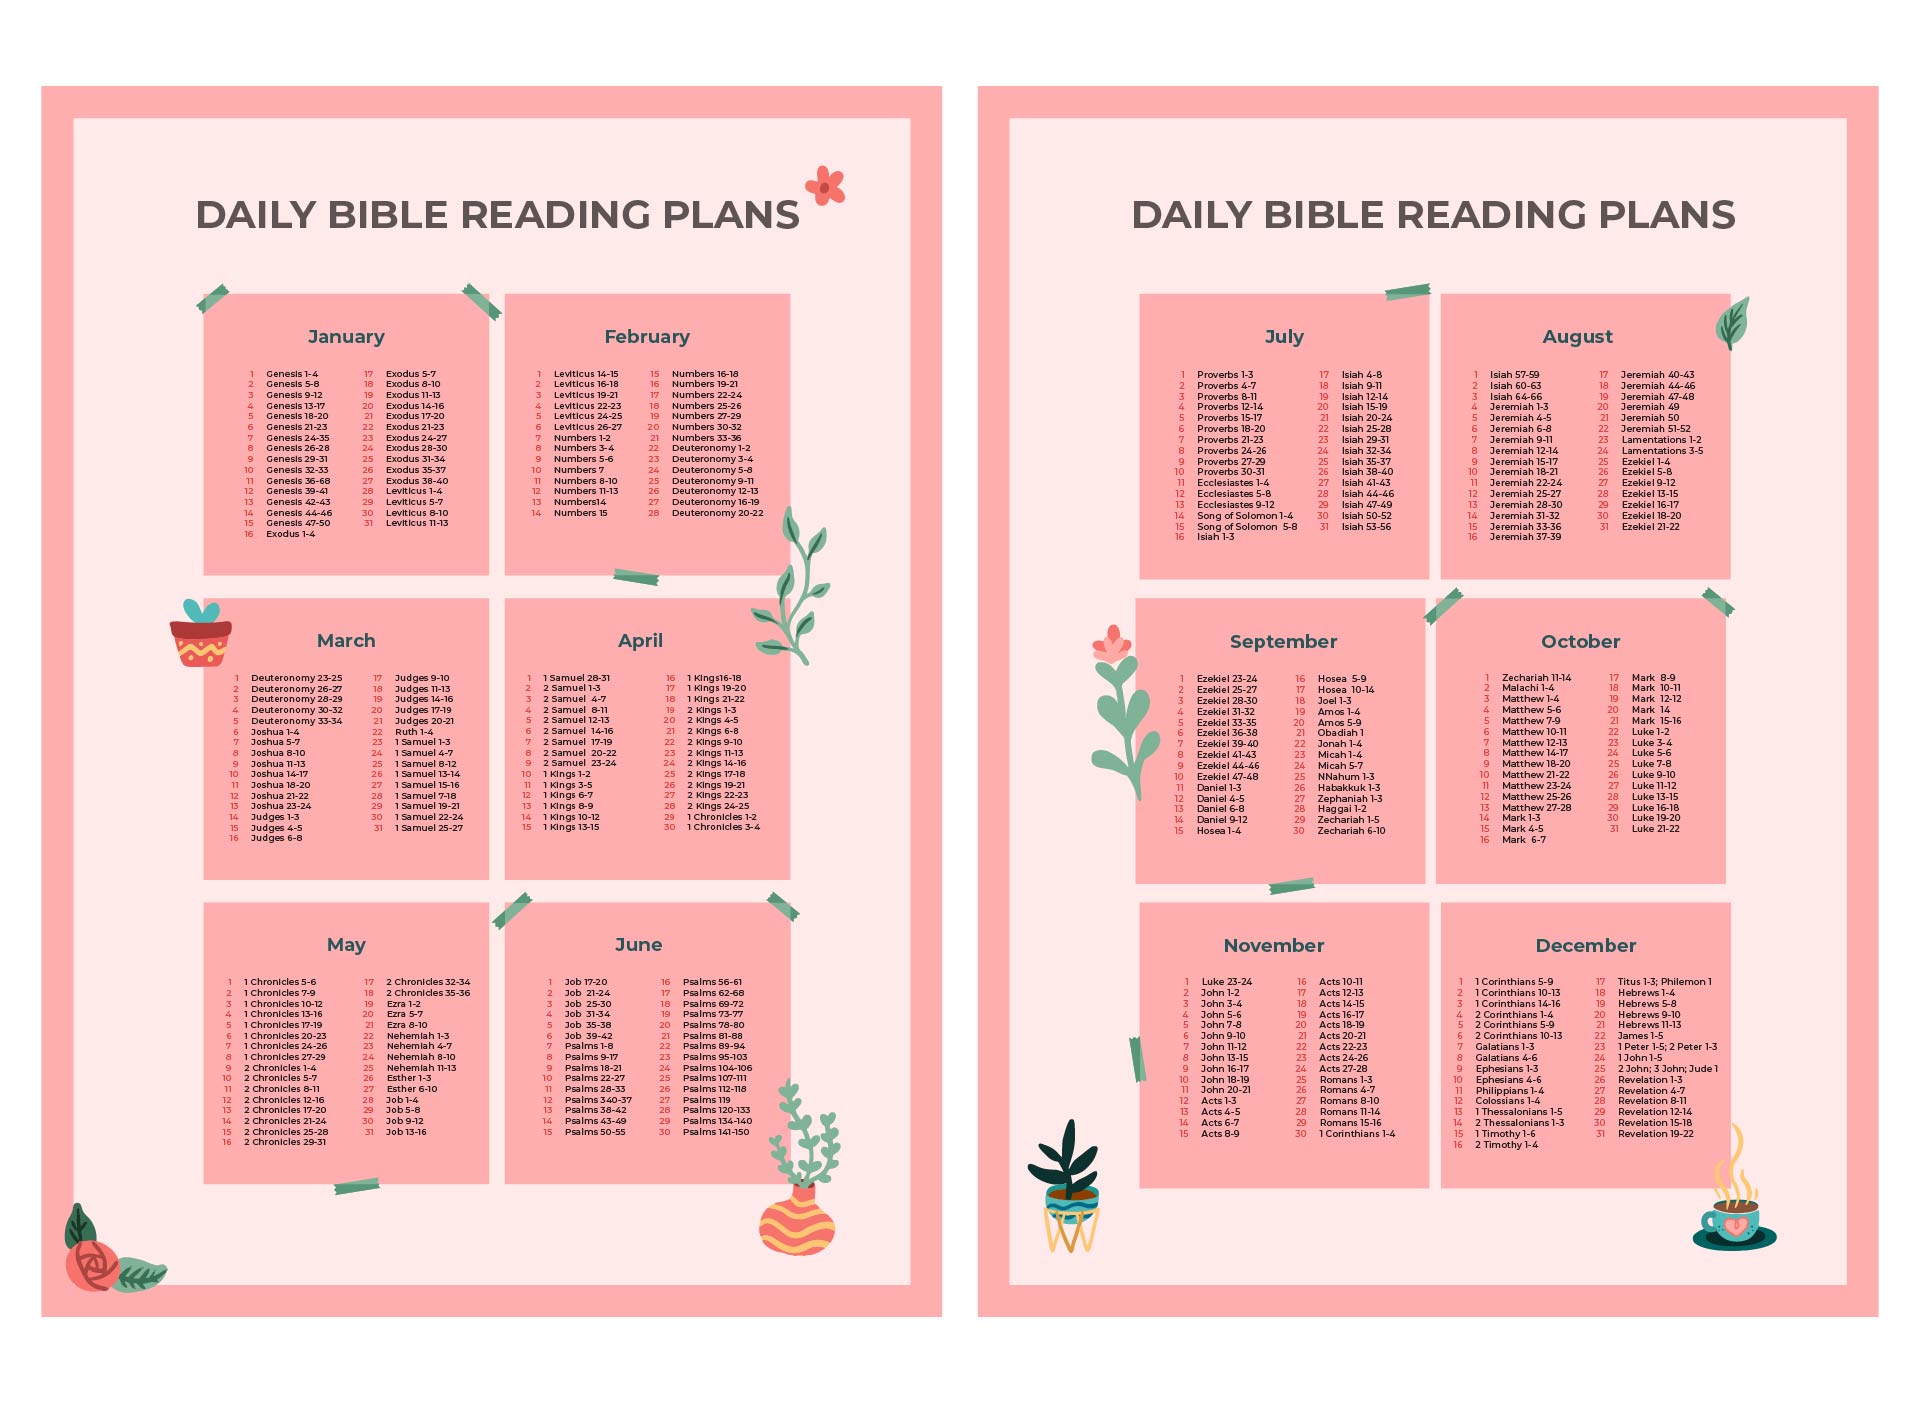 Daily Bible Reading Plans